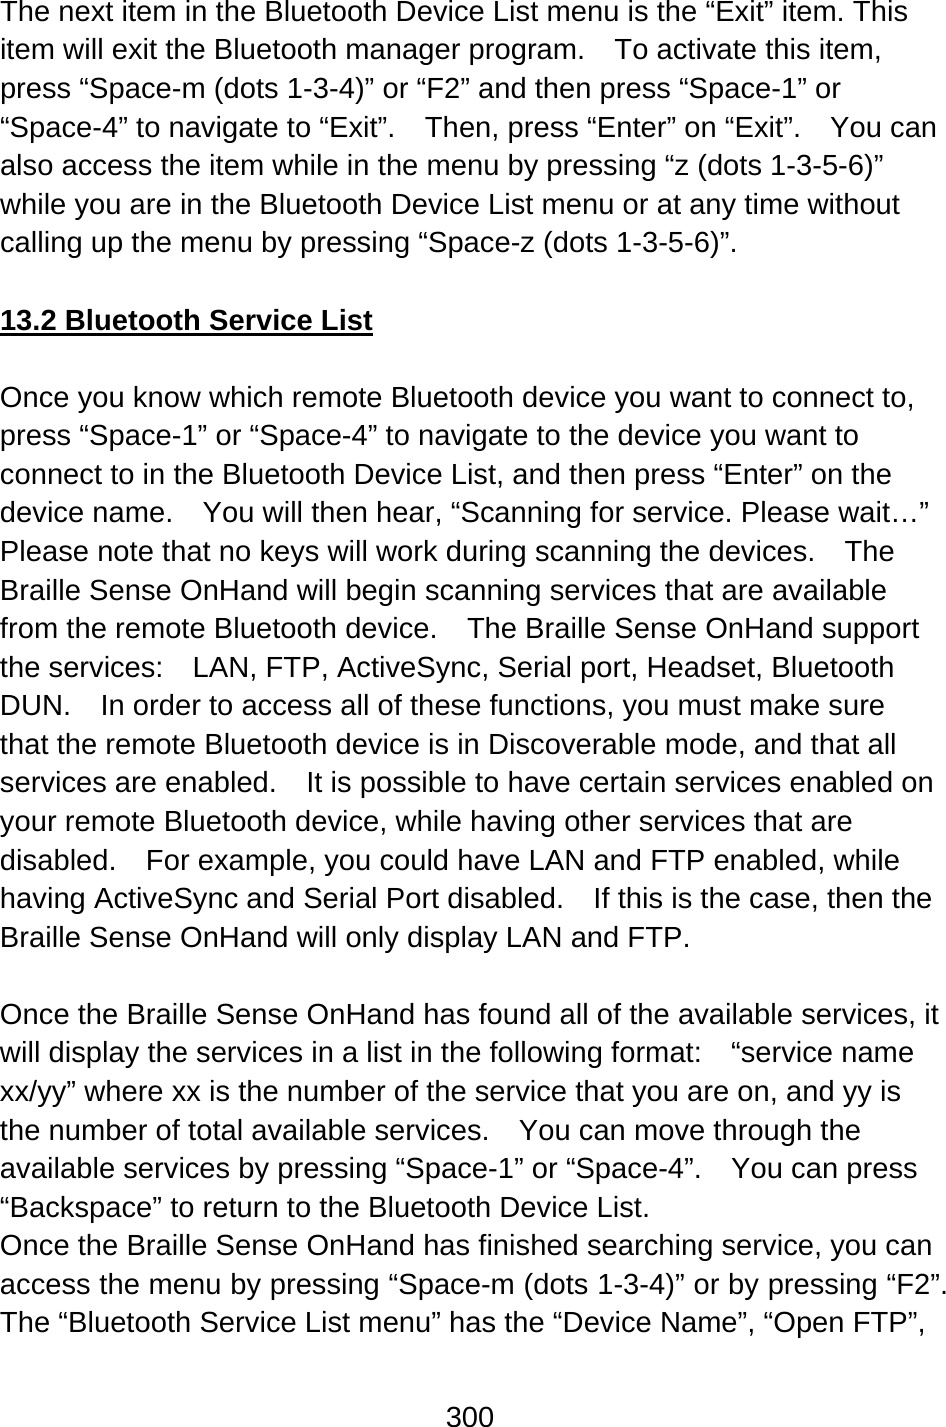 300  The next item in the Bluetooth Device List menu is the “Exit” item. This item will exit the Bluetooth manager program.    To activate this item, press “Space-m (dots 1-3-4)” or “F2” and then press “Space-1” or “Space-4” to navigate to “Exit”.    Then, press “Enter” on “Exit”.    You can also access the item while in the menu by pressing “z (dots 1-3-5-6)” while you are in the Bluetooth Device List menu or at any time without calling up the menu by pressing “Space-z (dots 1-3-5-6)”.  13.2 Bluetooth Service List  Once you know which remote Bluetooth device you want to connect to, press “Space-1” or “Space-4” to navigate to the device you want to connect to in the Bluetooth Device List, and then press “Enter” on the device name.    You will then hear, “Scanning for service. Please wait…” Please note that no keys will work during scanning the devices.    The Braille Sense OnHand will begin scanning services that are available from the remote Bluetooth device.    The Braille Sense OnHand support the services:    LAN, FTP, ActiveSync, Serial port, Headset, Bluetooth DUN.    In order to access all of these functions, you must make sure that the remote Bluetooth device is in Discoverable mode, and that all services are enabled.  It is possible to have certain services enabled on your remote Bluetooth device, while having other services that are disabled.    For example, you could have LAN and FTP enabled, while having ActiveSync and Serial Port disabled.    If this is the case, then the Braille Sense OnHand will only display LAN and FTP.  Once the Braille Sense OnHand has found all of the available services, it will display the services in a list in the following format:    “service name xx/yy” where xx is the number of the service that you are on, and yy is the number of total available services.    You can move through the available services by pressing “Space-1” or “Space-4”.    You can press “Backspace” to return to the Bluetooth Device List. Once the Braille Sense OnHand has finished searching service, you can access the menu by pressing “Space-m (dots 1-3-4)” or by pressing “F2”.   The “Bluetooth Service List menu” has the “Device Name”, “Open FTP”, 